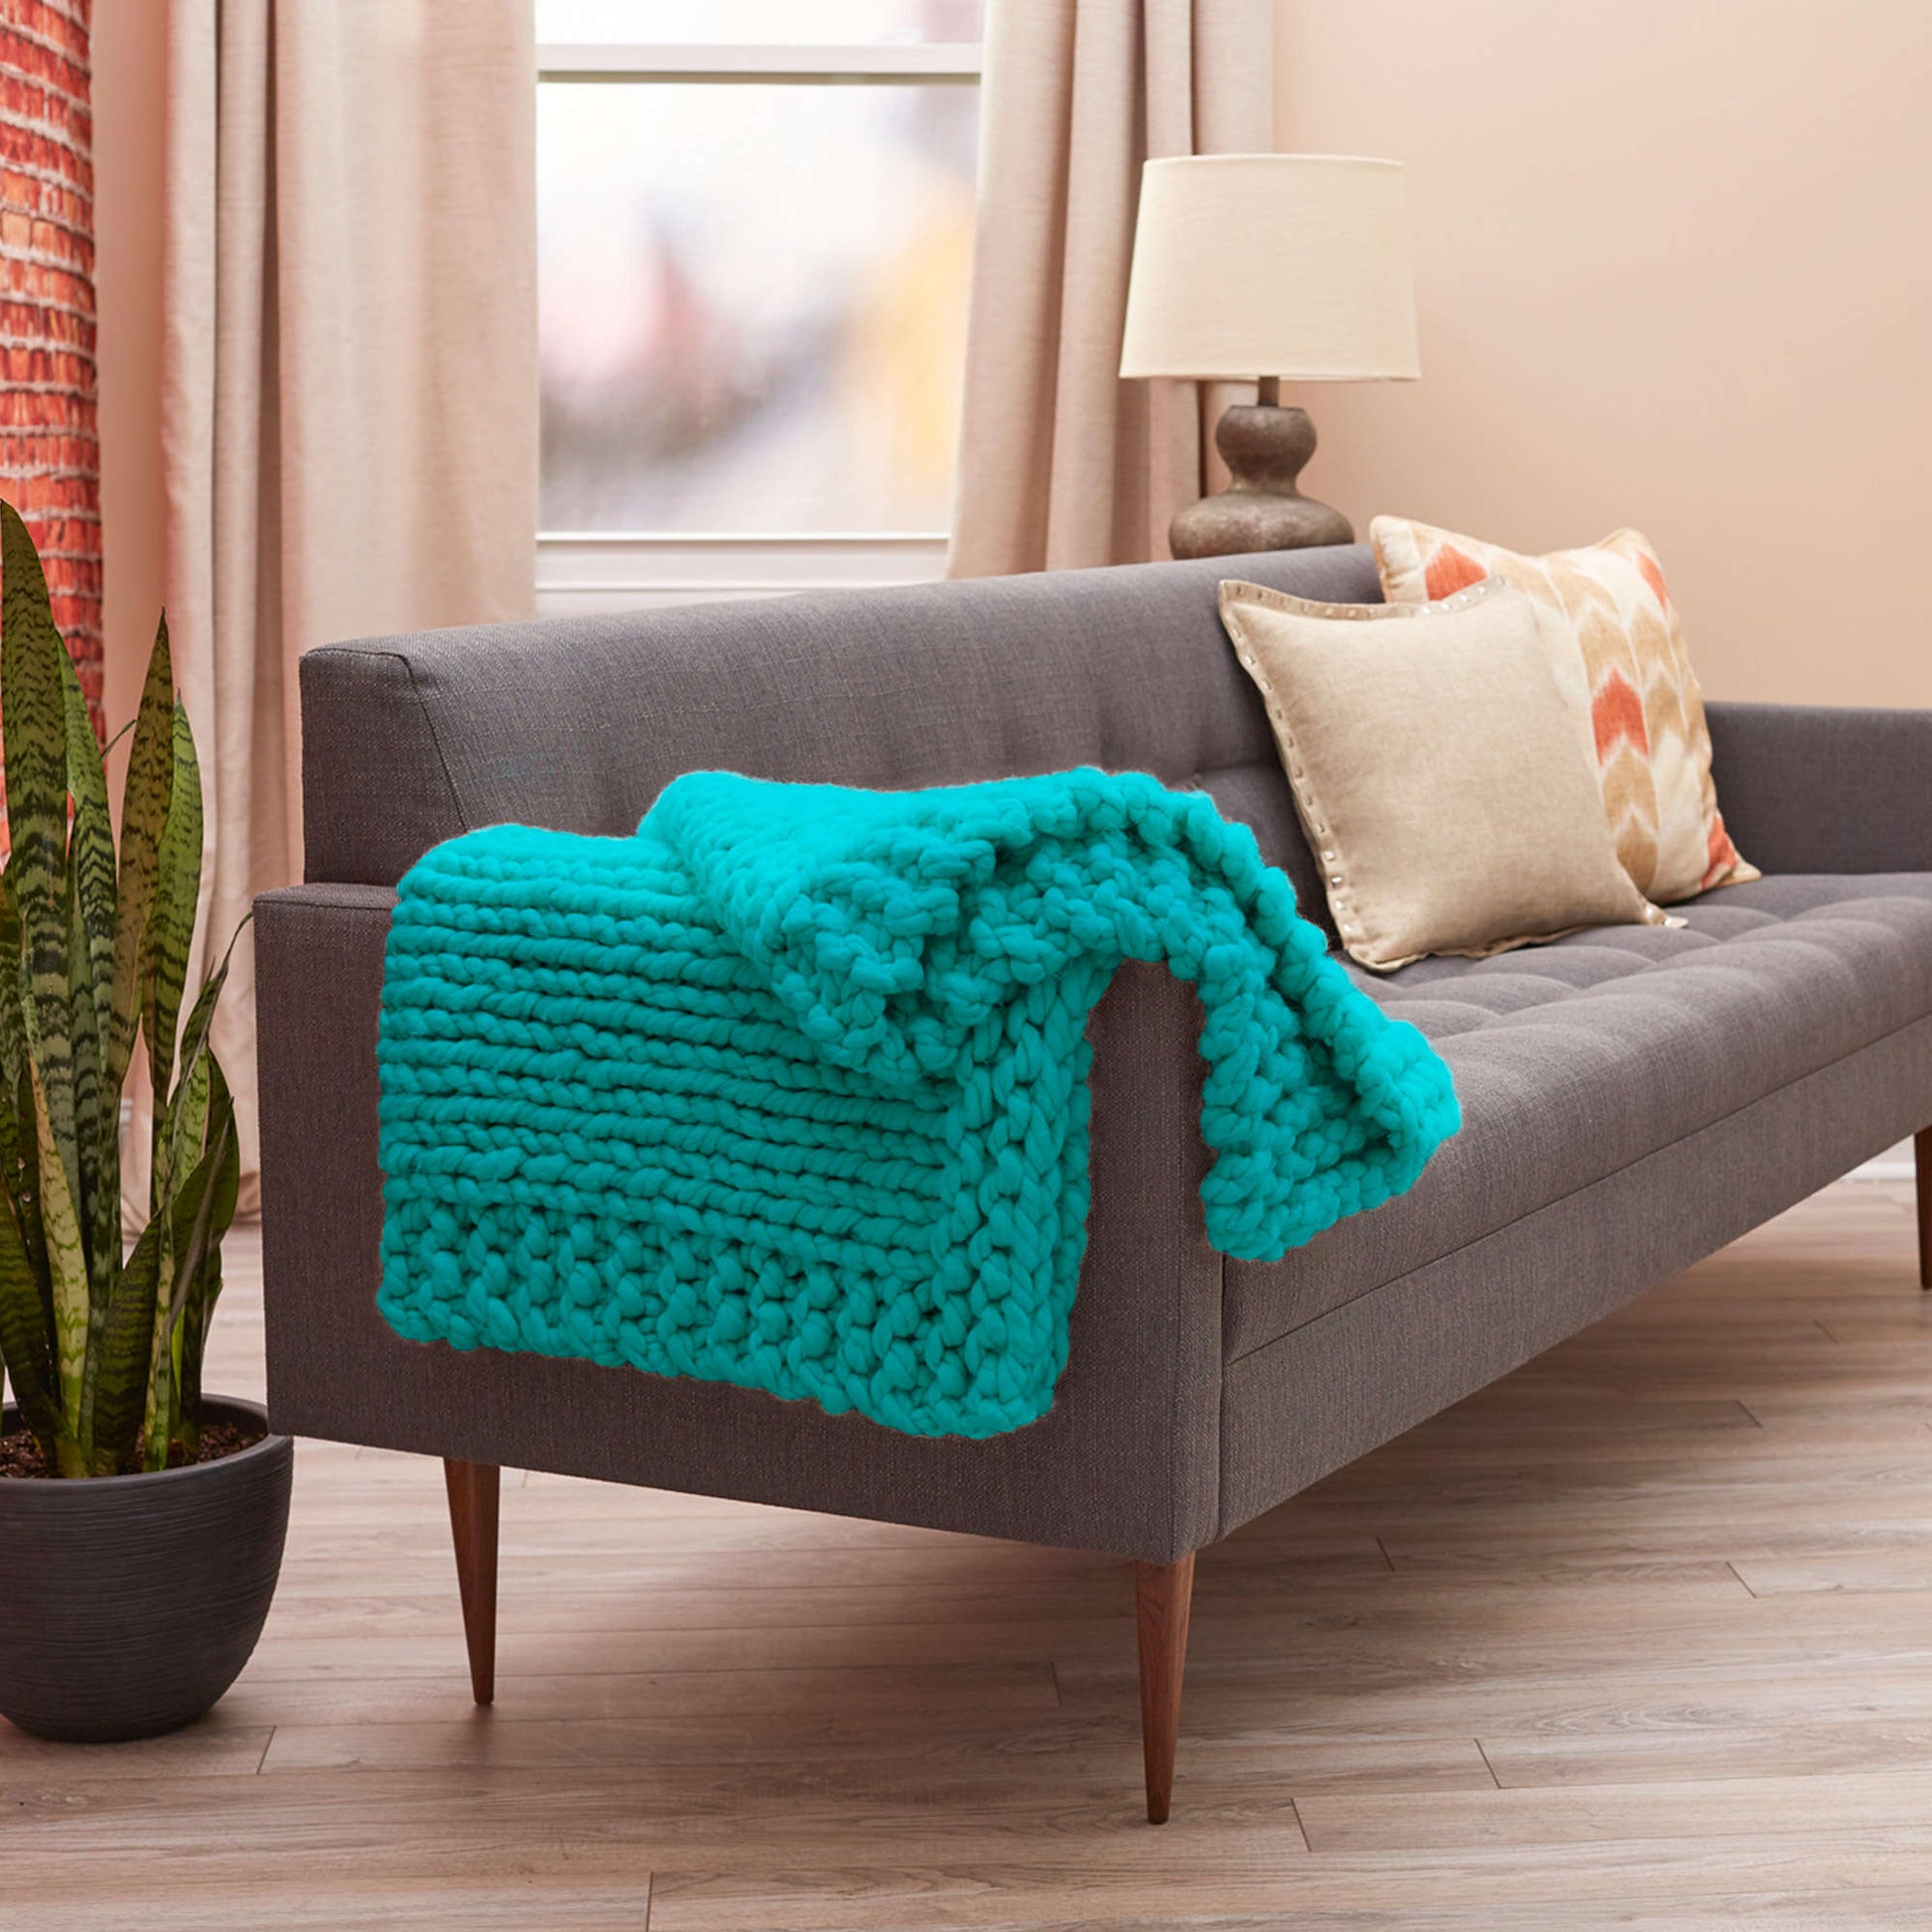 Free Red Heart Cool Comforts Knit Throw Pattern